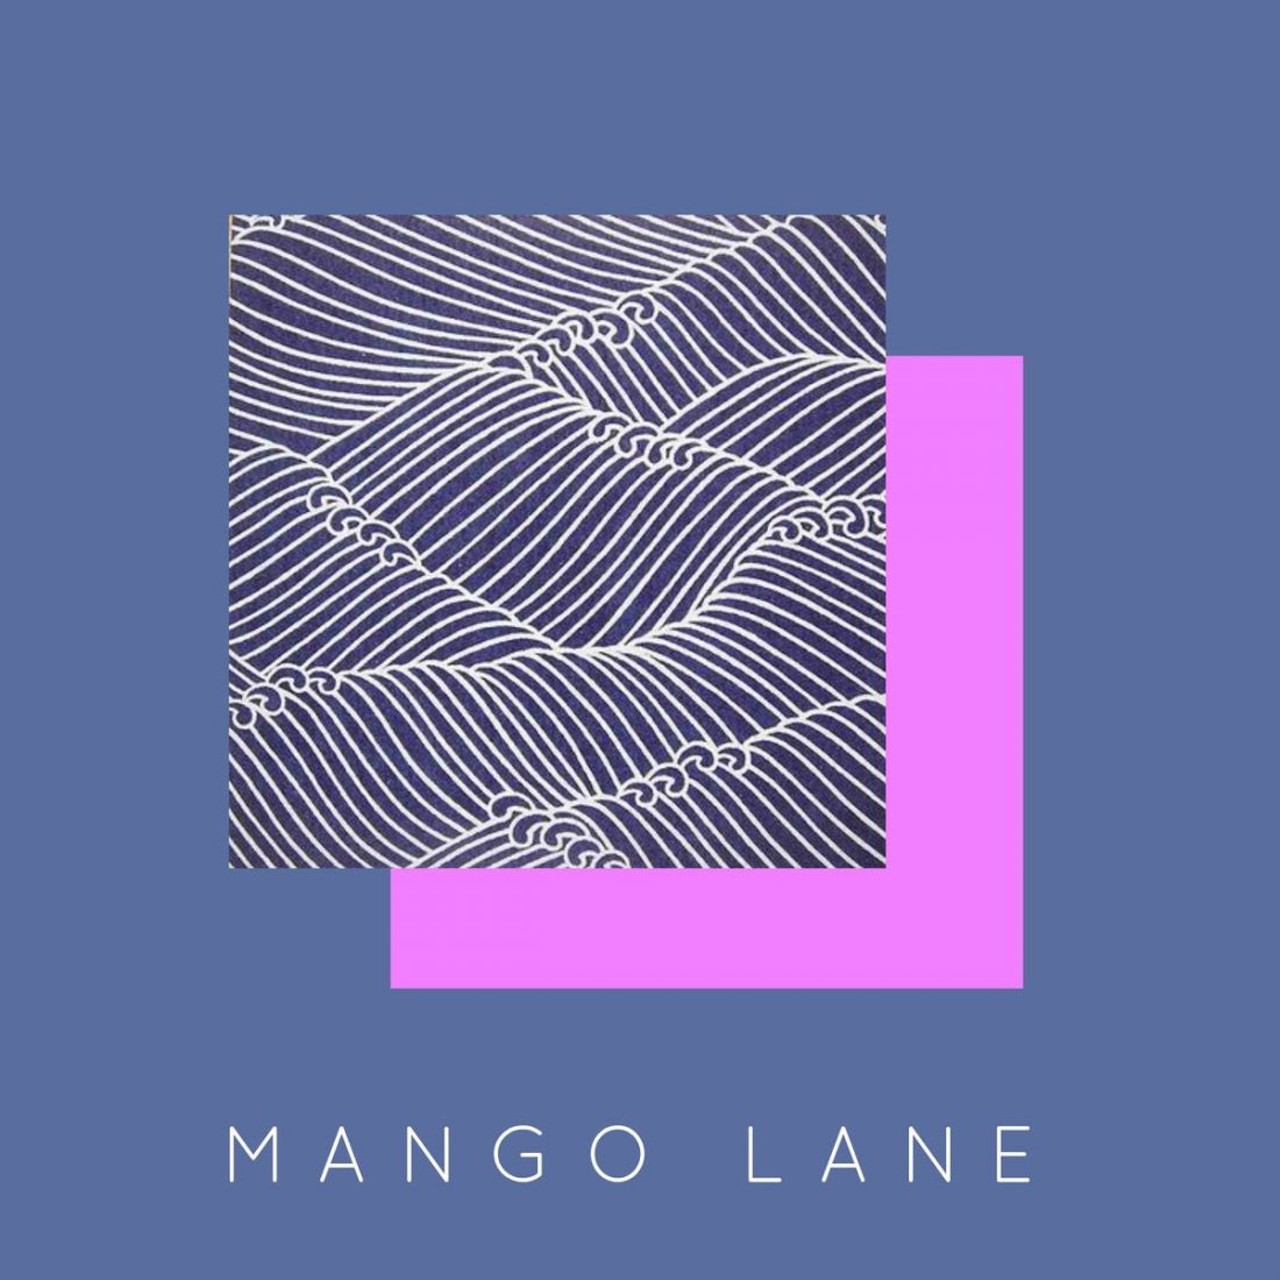 4. Mango Lane | Mango Lane
If Detroit had palm trees and if palm trees had a theme song and that theme song scored a mid-afternoon Netflix and chill session &#151; well, the result might be Mango Lane's self-titled debut. Channeling Washed Out with hints of Phoenix, Jack Engwall and Austin Carpenter's Mango Lane shimmers like a post-coital American Spirit afterglow on a new stranger&#146;s balcony.